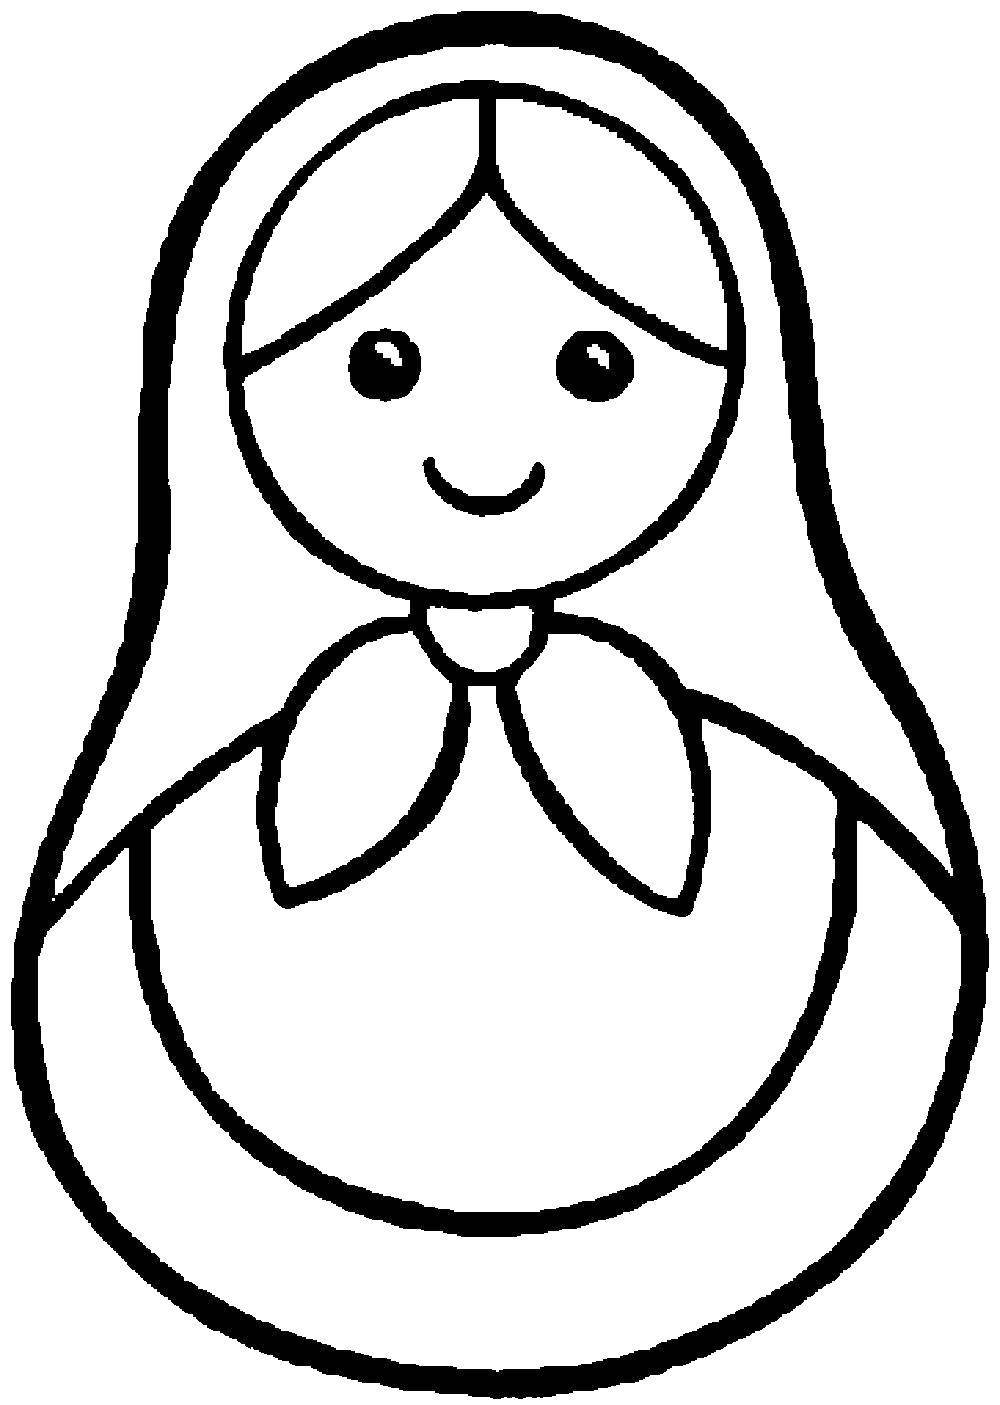 Coloring Matryoshka. Category coloring for little ones. Tags:  matryoshka.